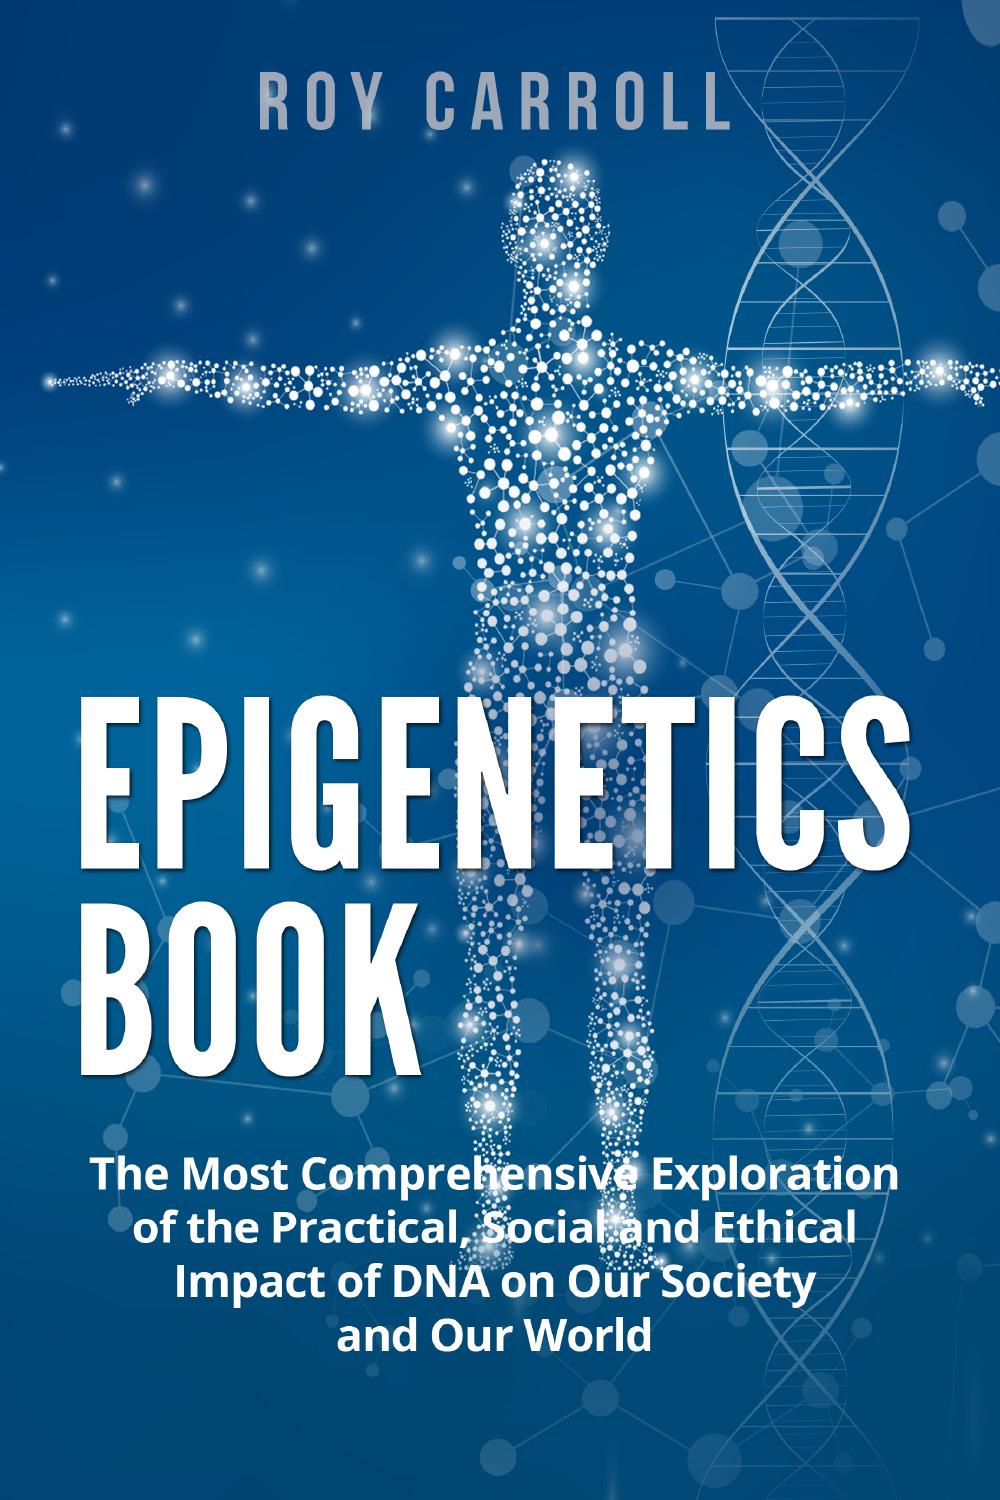 Epigenetics Book. The Most Comprehensive Exploration of the Practical, Social and Ethical Impact of DNA on Our Society and Our World